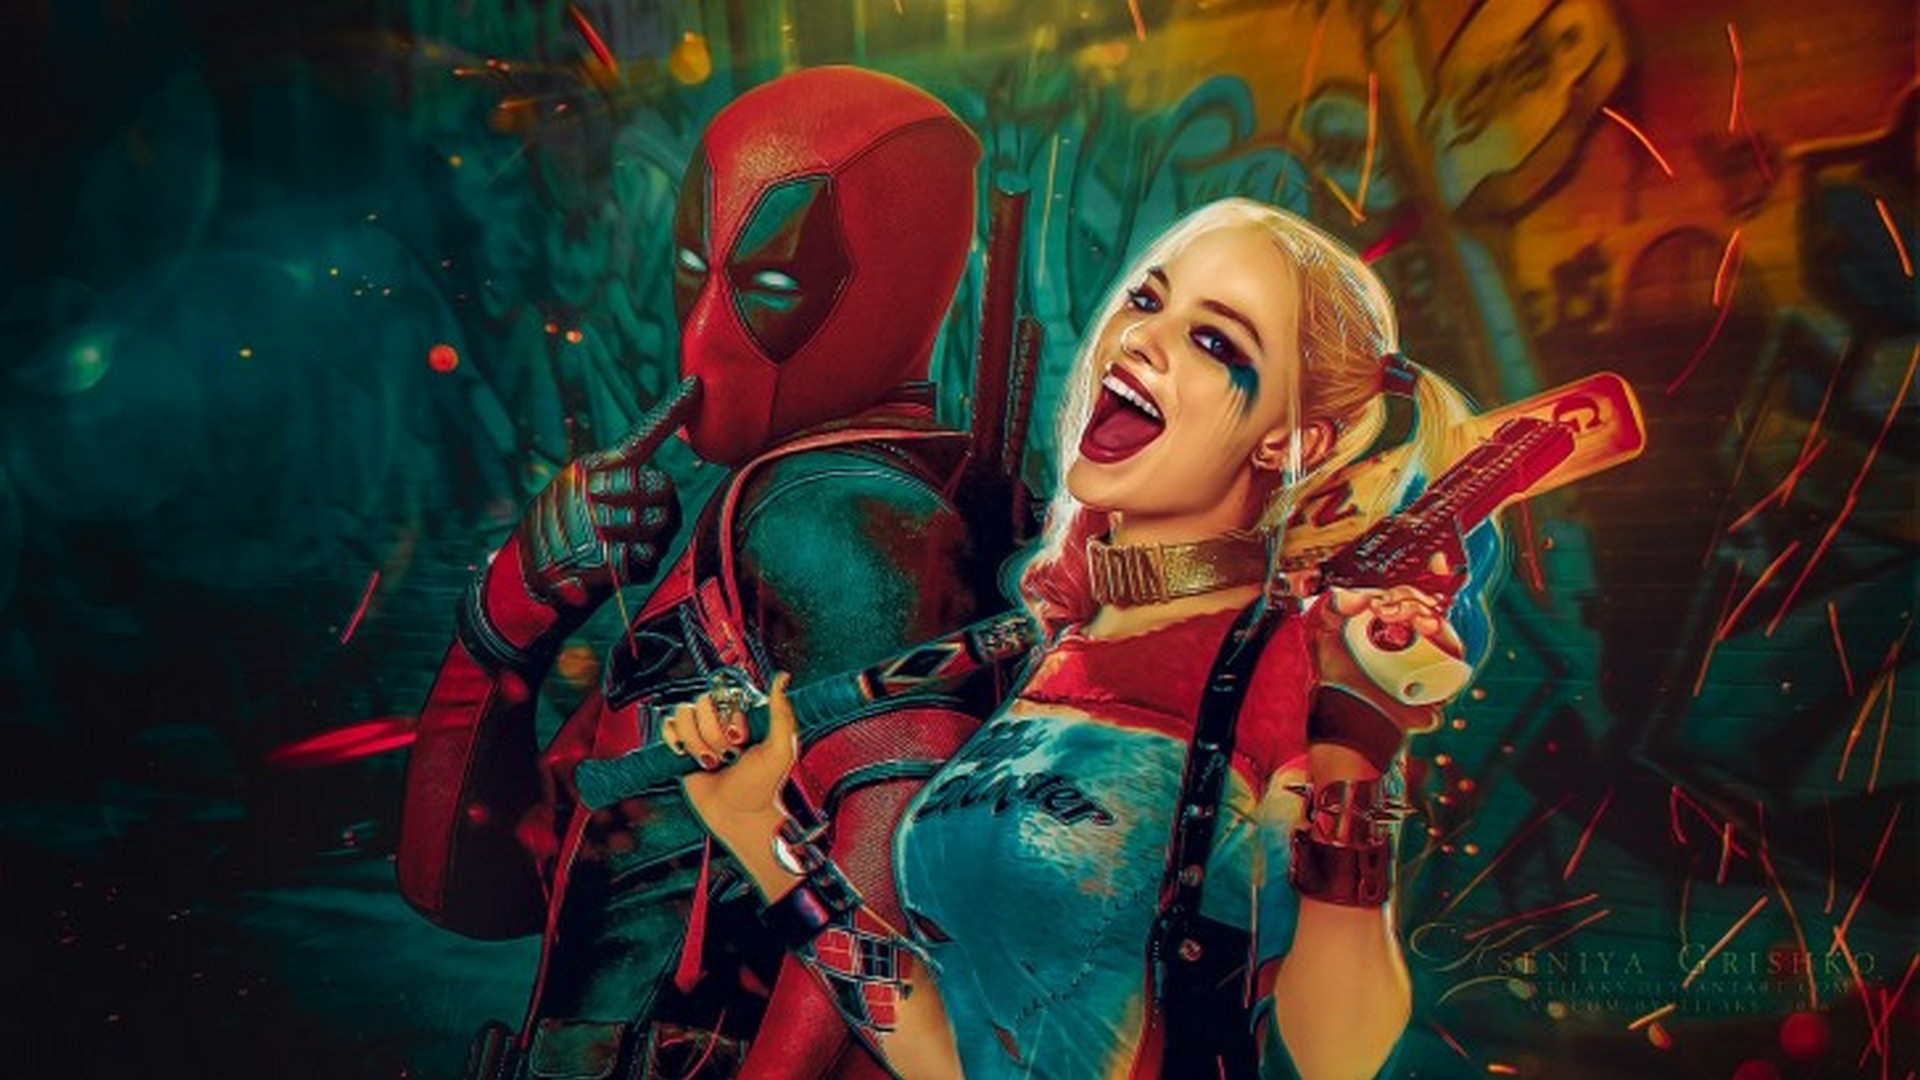 Harley Quinn Movie Wallpaper with resolution 1920X1080 pixel. You can use this wallpaper as background for your desktop Computer Screensavers, Android or iPhone smartphones